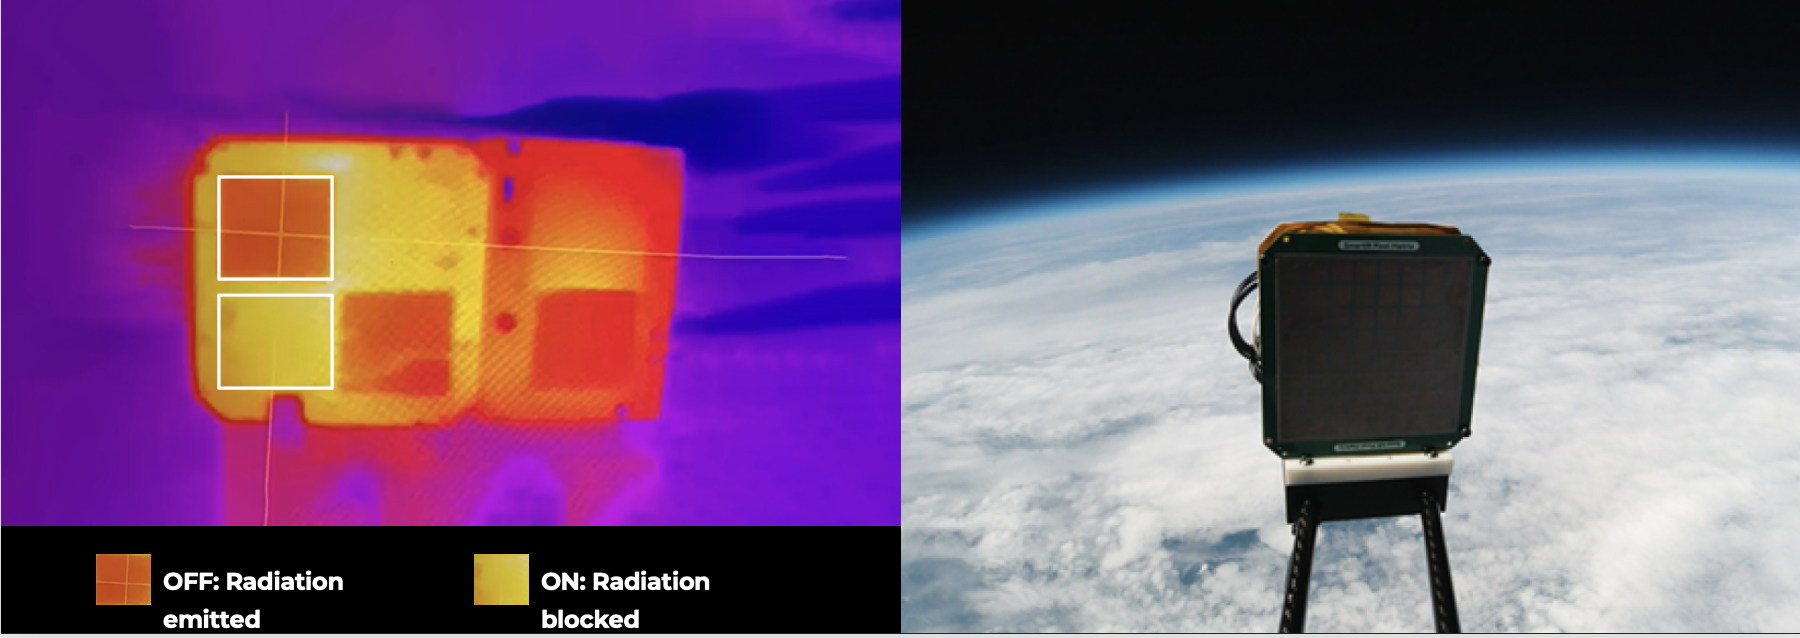 infrared image showing SmartIR's smart tiles working (Right), the smart cube using smart tiles in space (Left).